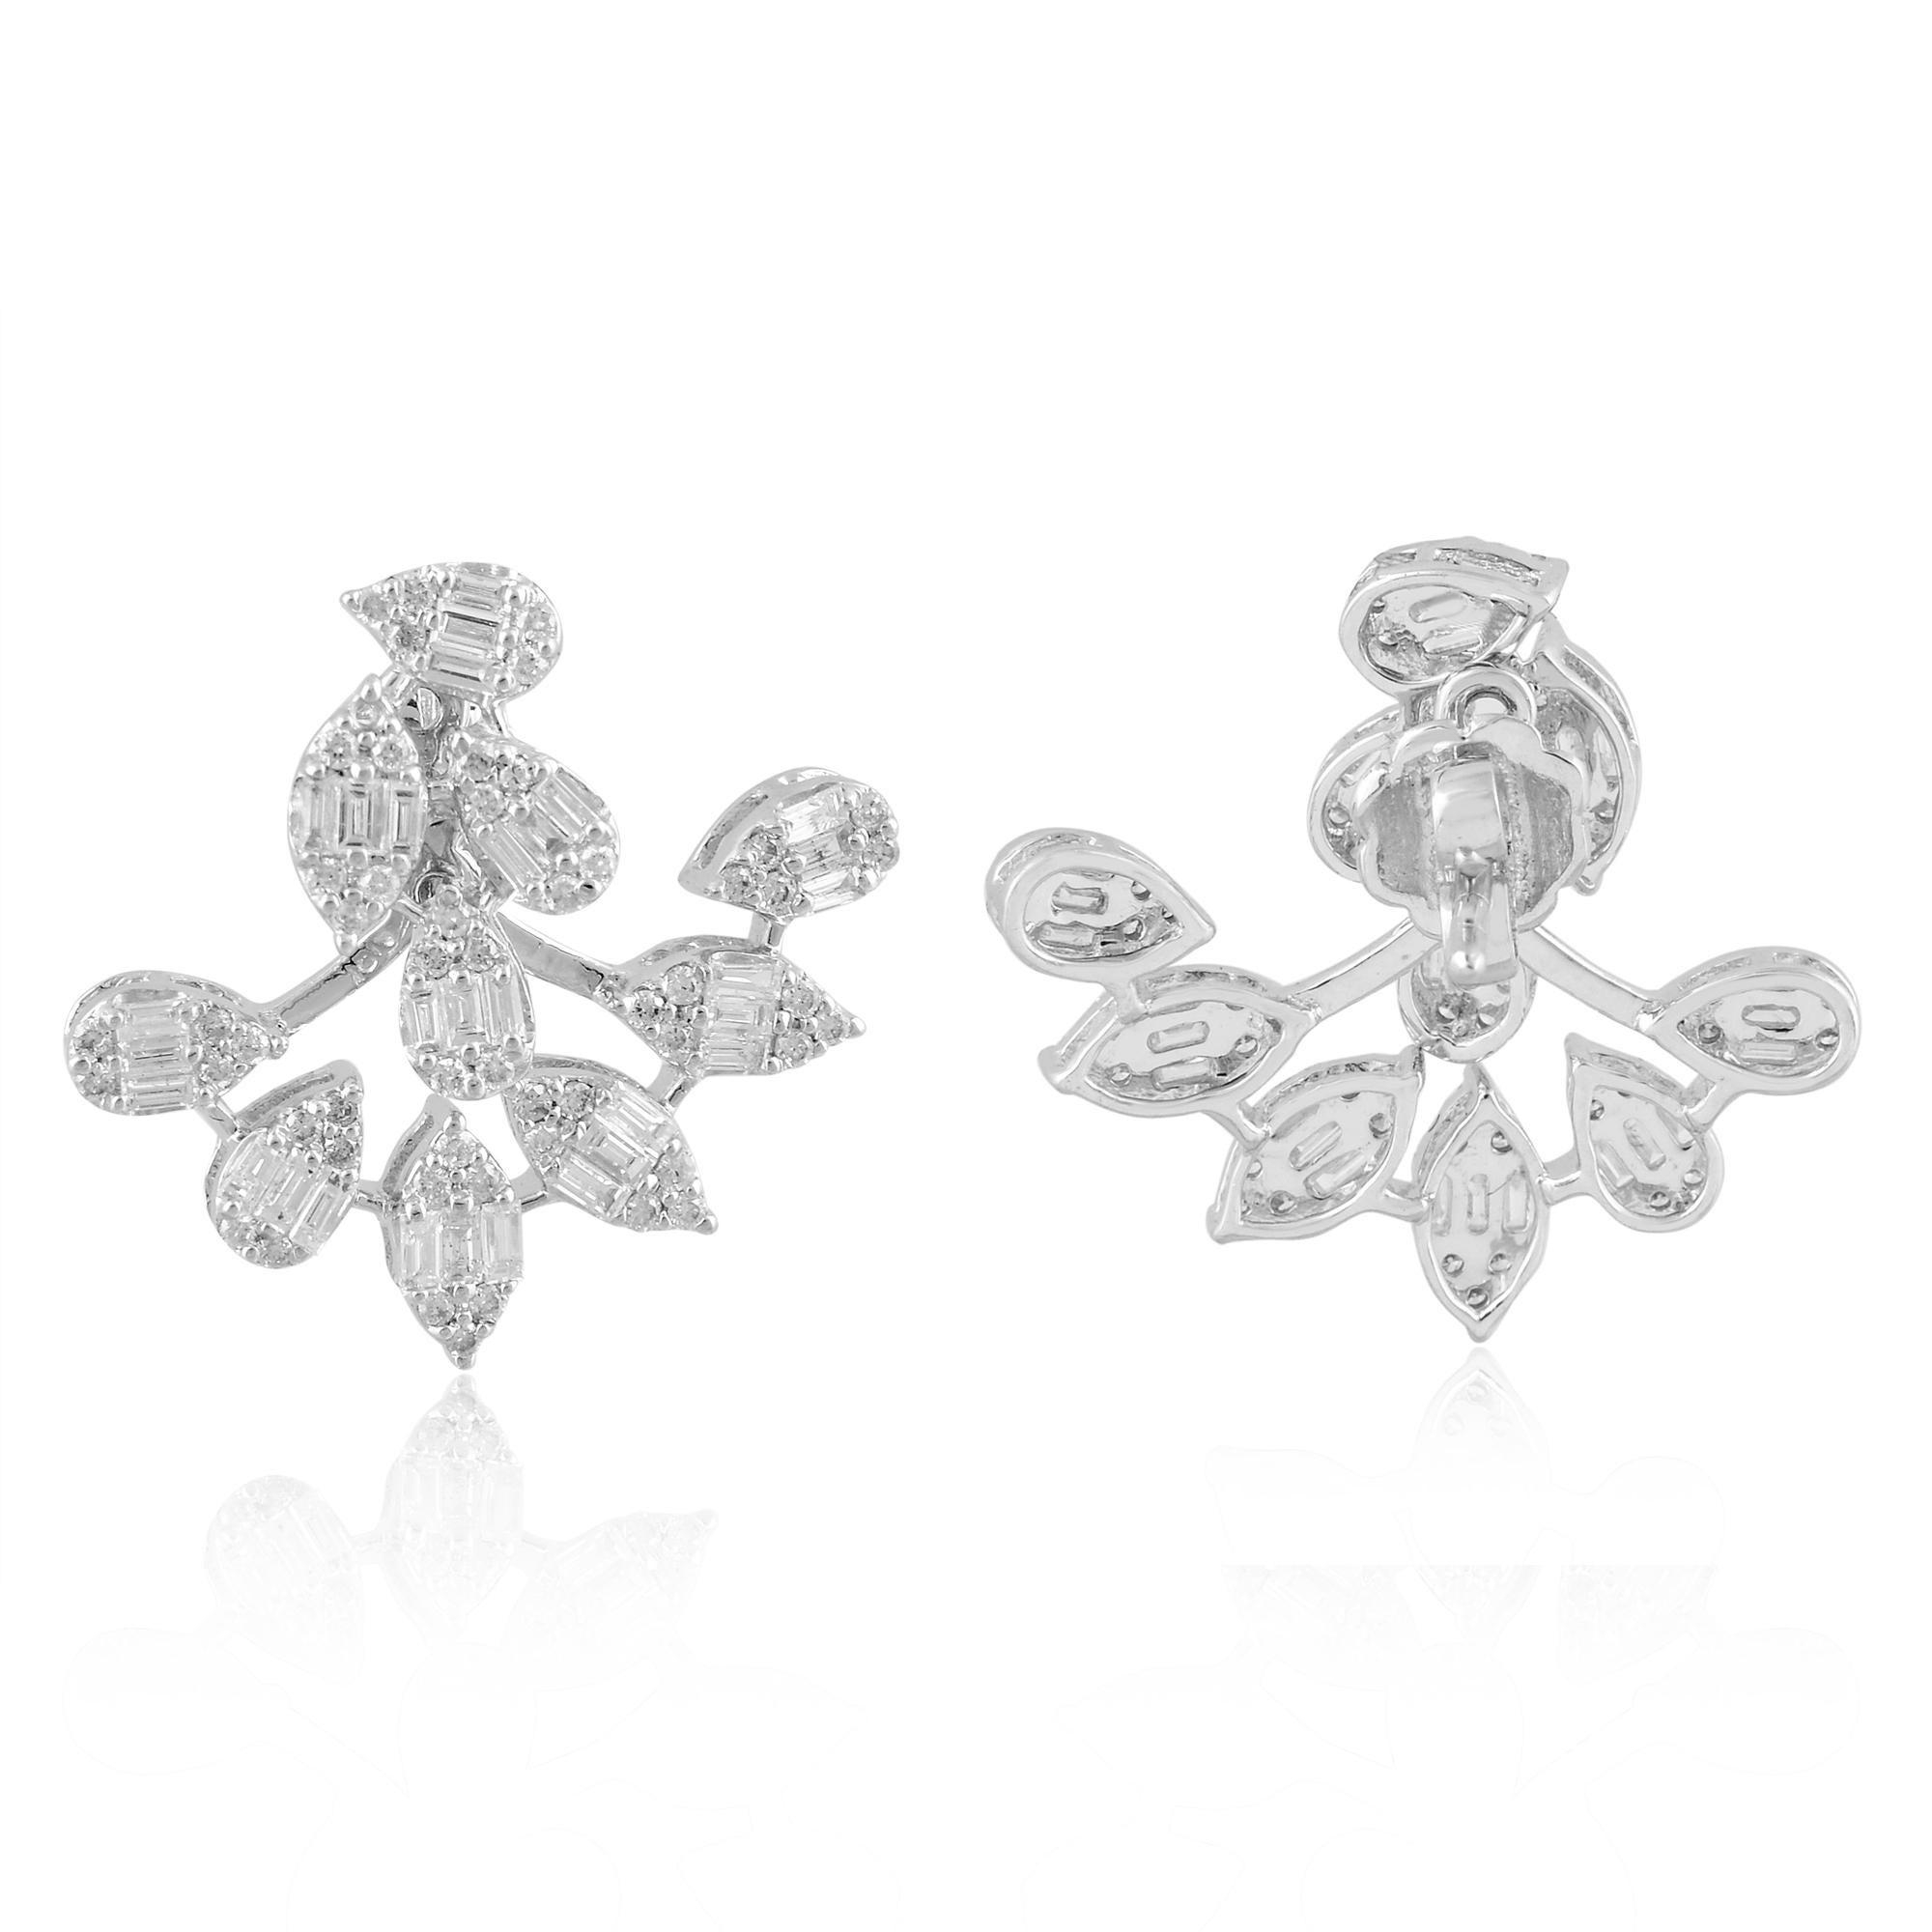 Item Code :- CN-25431
Gross Wet. :- 7.90 gm
18k White Gold Wet. :- 7.48 gm
Diamond Wet. :- 2.10 Ct. ( AVERAGE DIAMOND CLARITY SI1-SI2 & COLOR H-I )
Earrings Size :- 24 x 25 mm approx.

✦ Sizing
.....................
We can adjust most items to fit